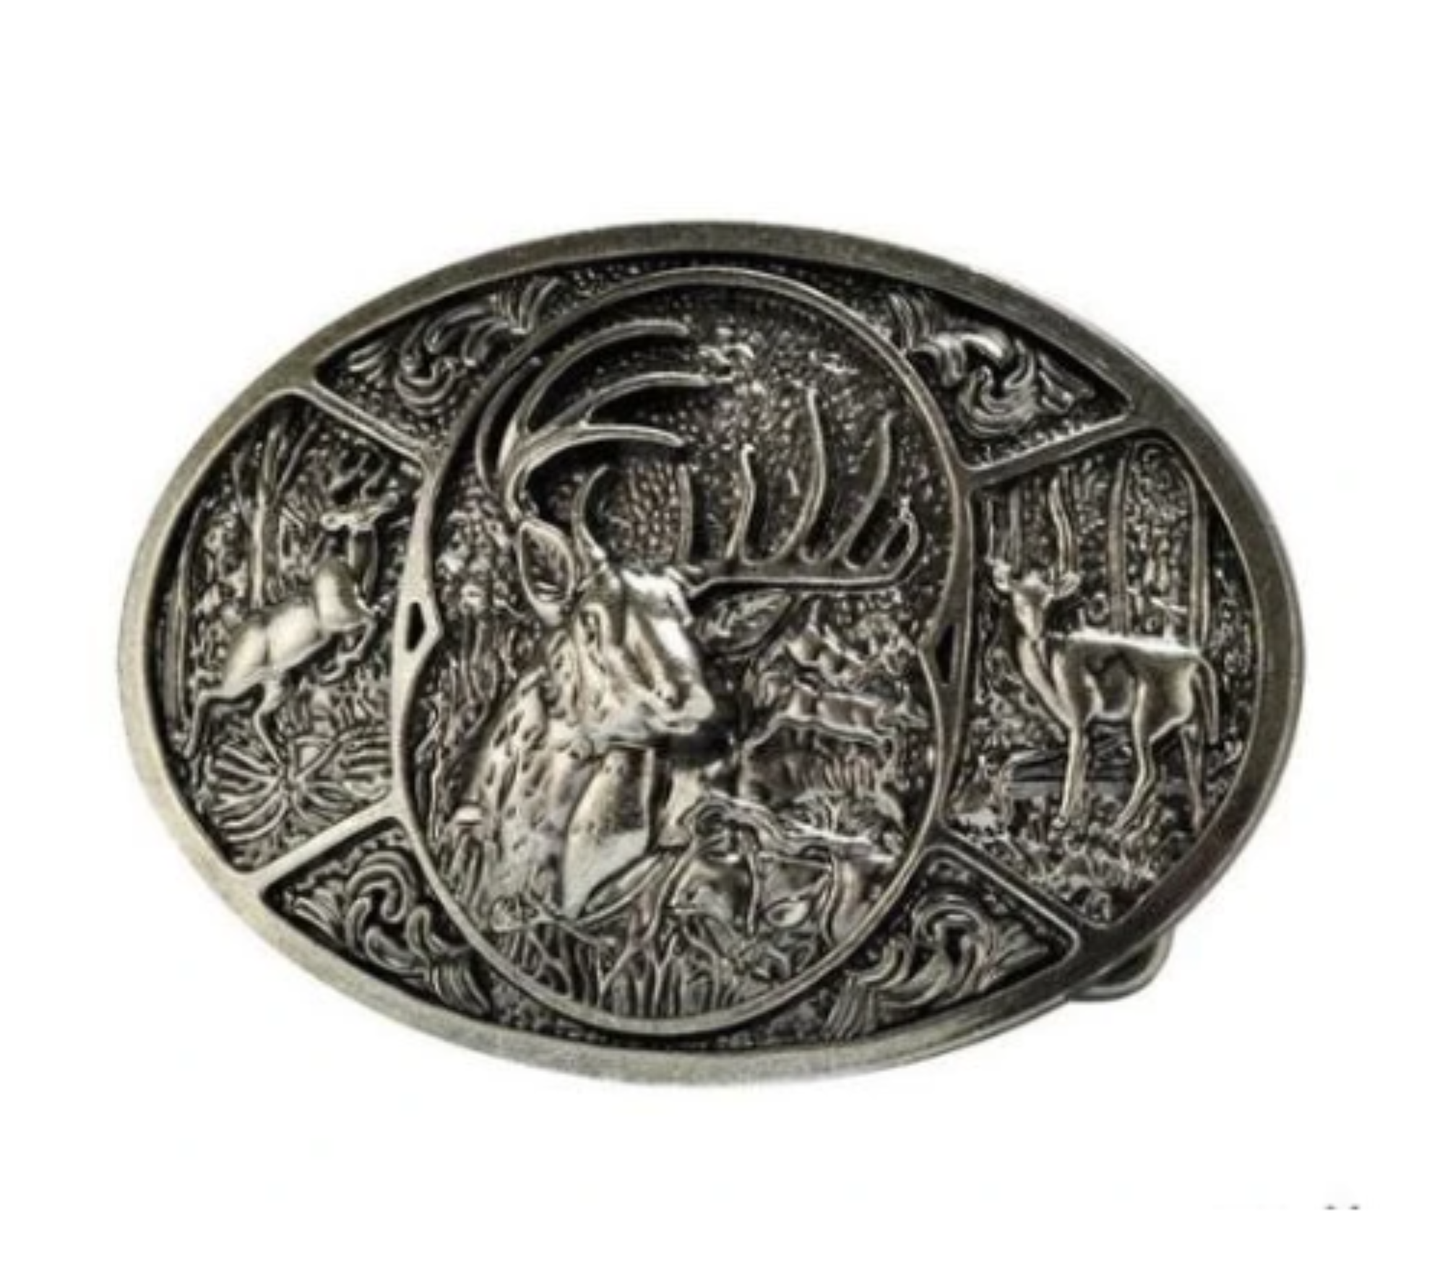 Bow Hunting Belt Buckle 1557